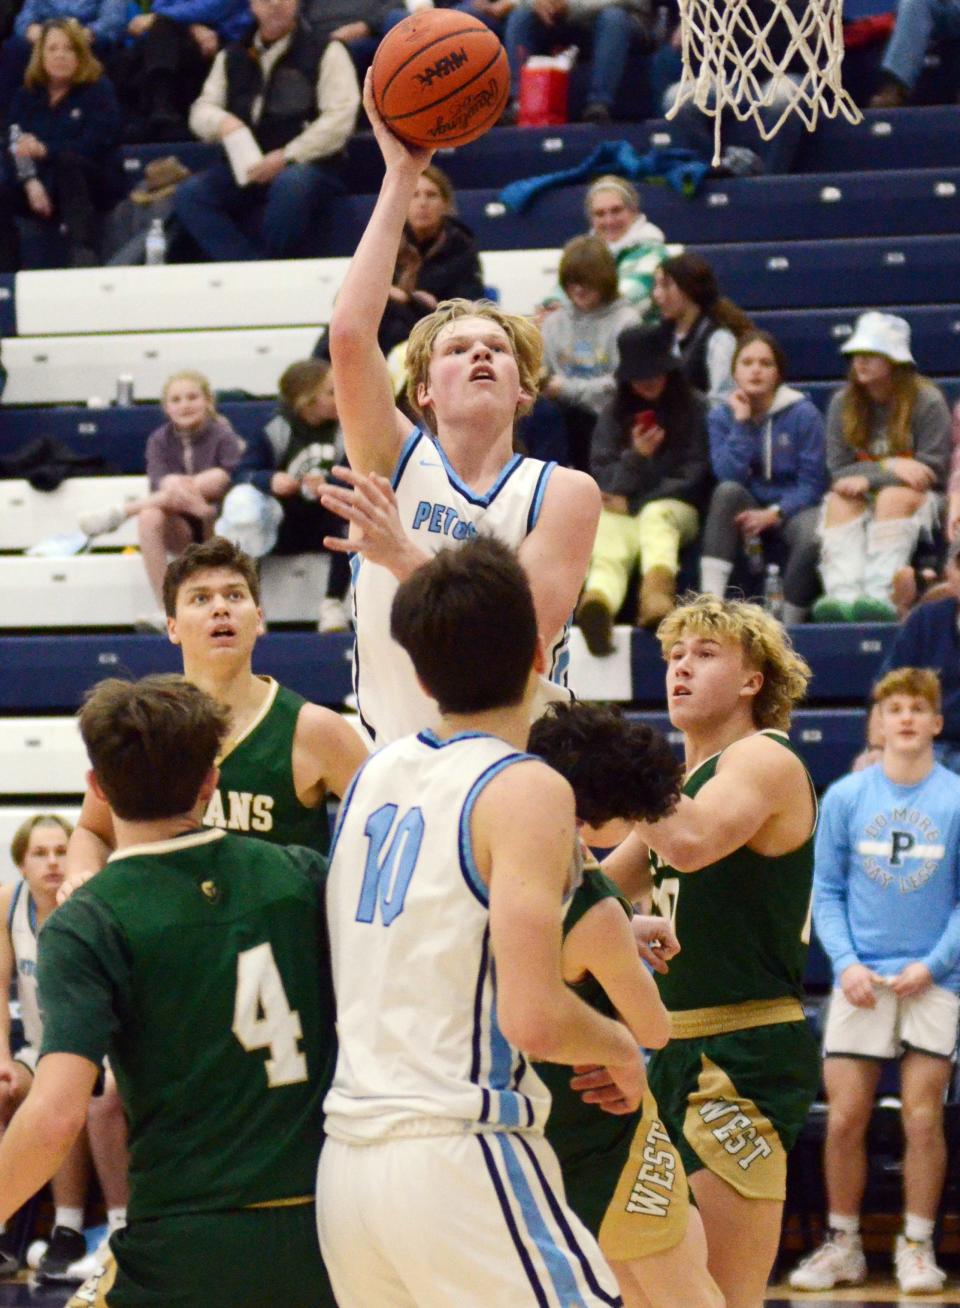 Petoskey's Cade Trudeau drives and elevates for a basket against the Titans in the second half.